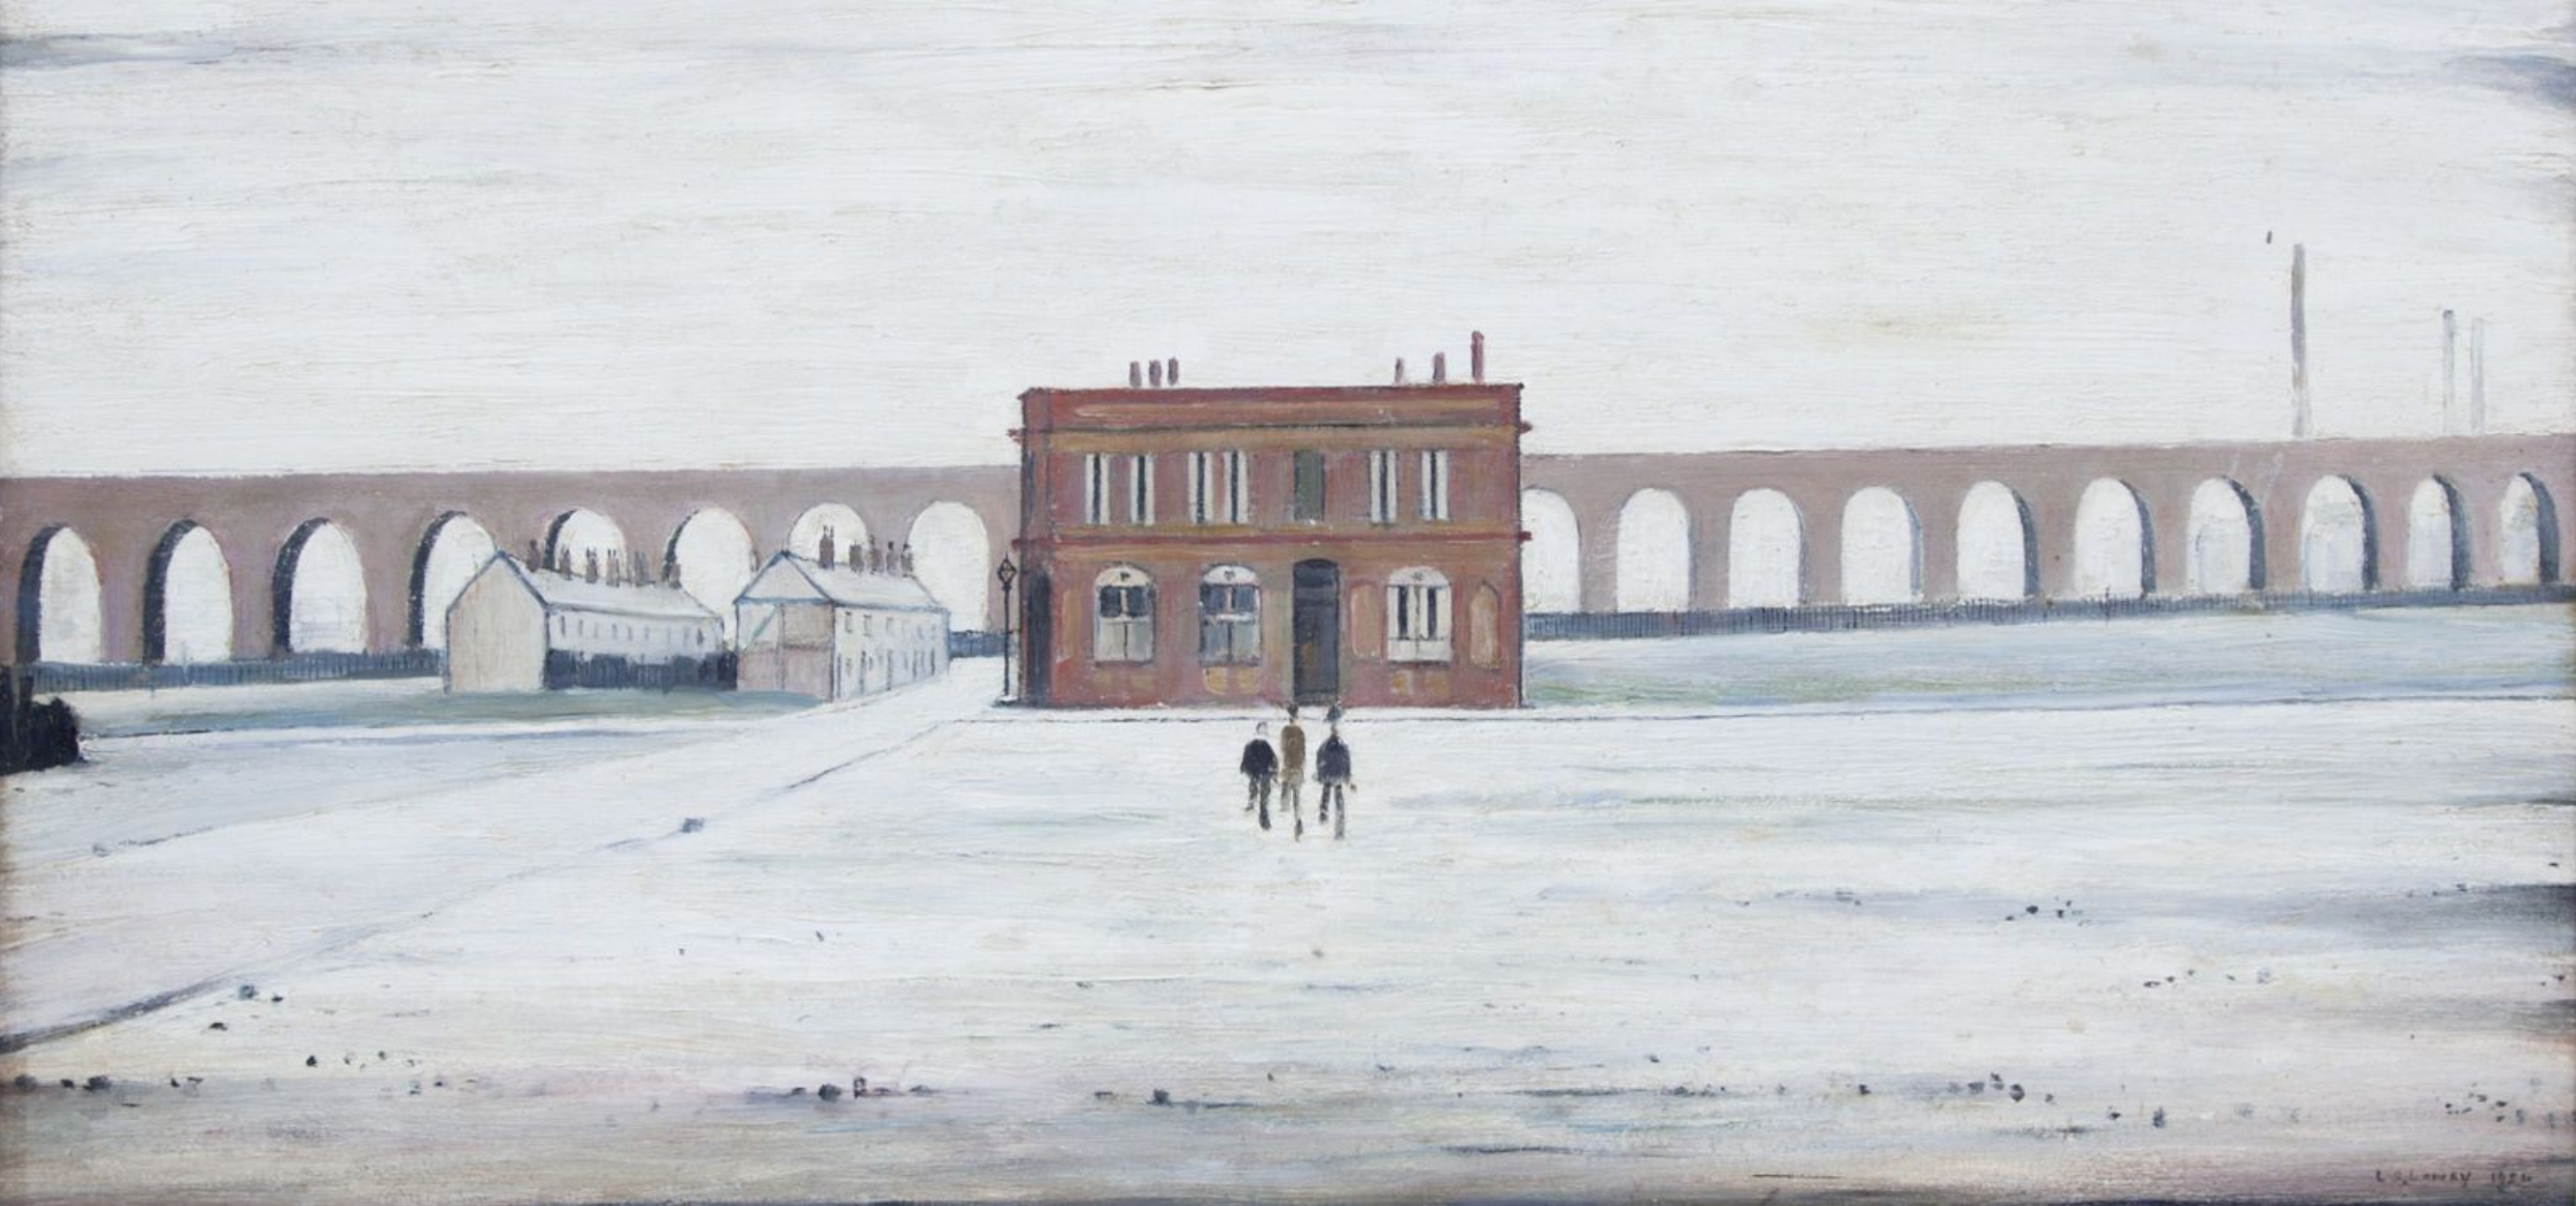 The Viaduct (1954) by Laurence Stephen Lowry (1887 - 1976), English artist.